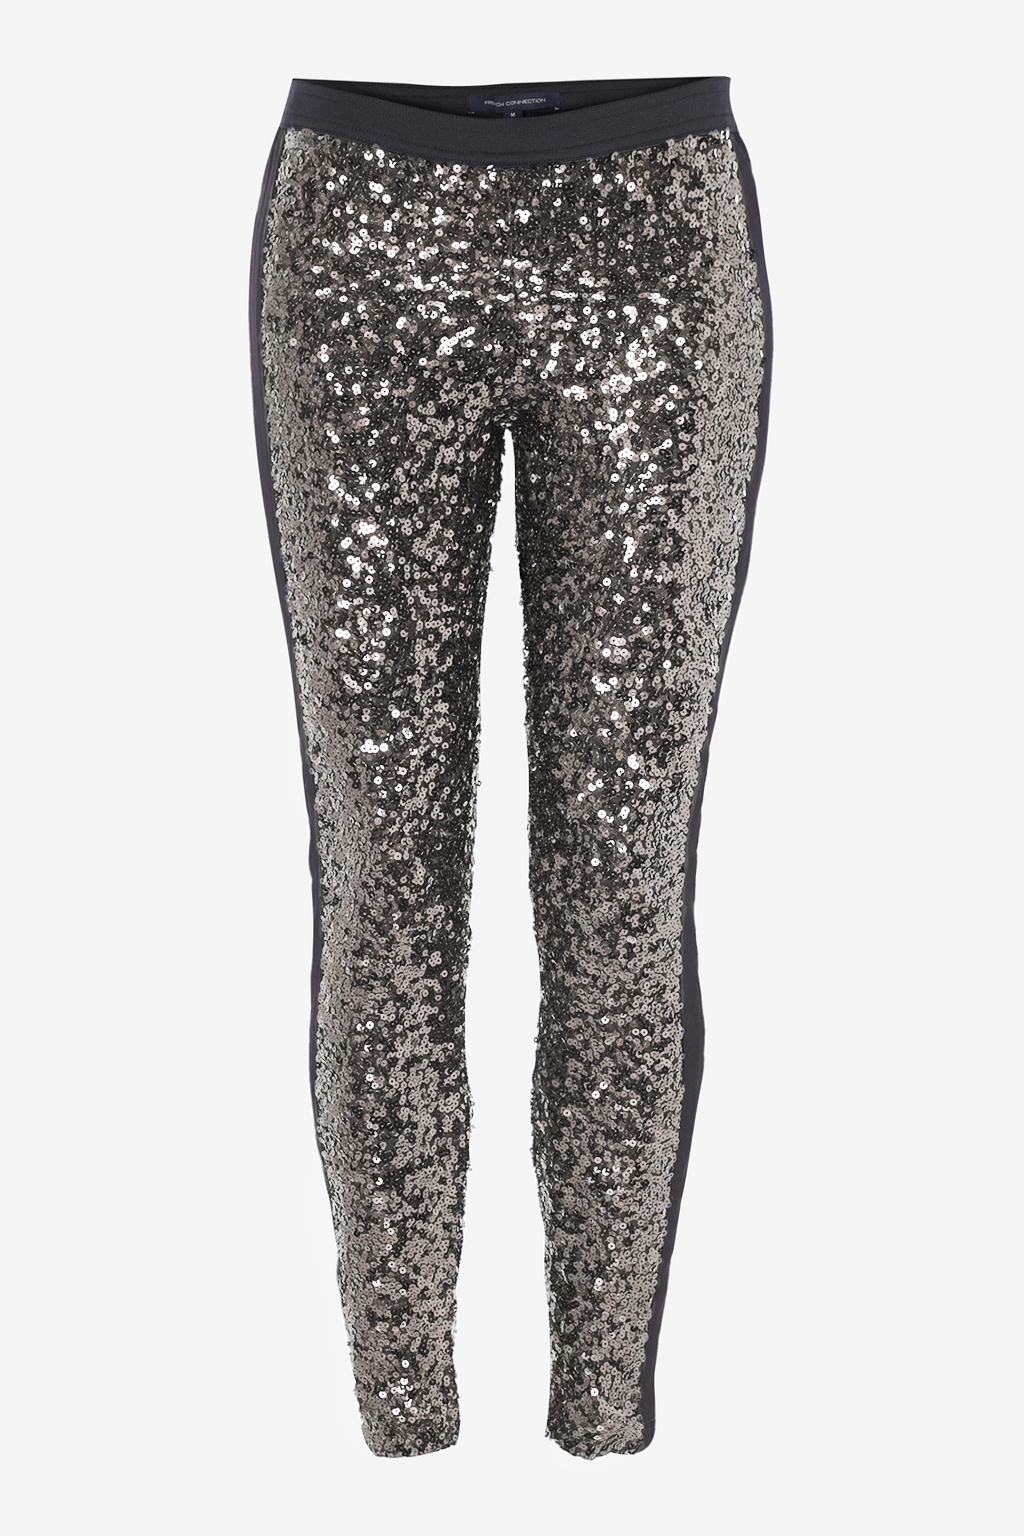 French connection Tuxedo Sequinned Leggings in Metallic | Lyst